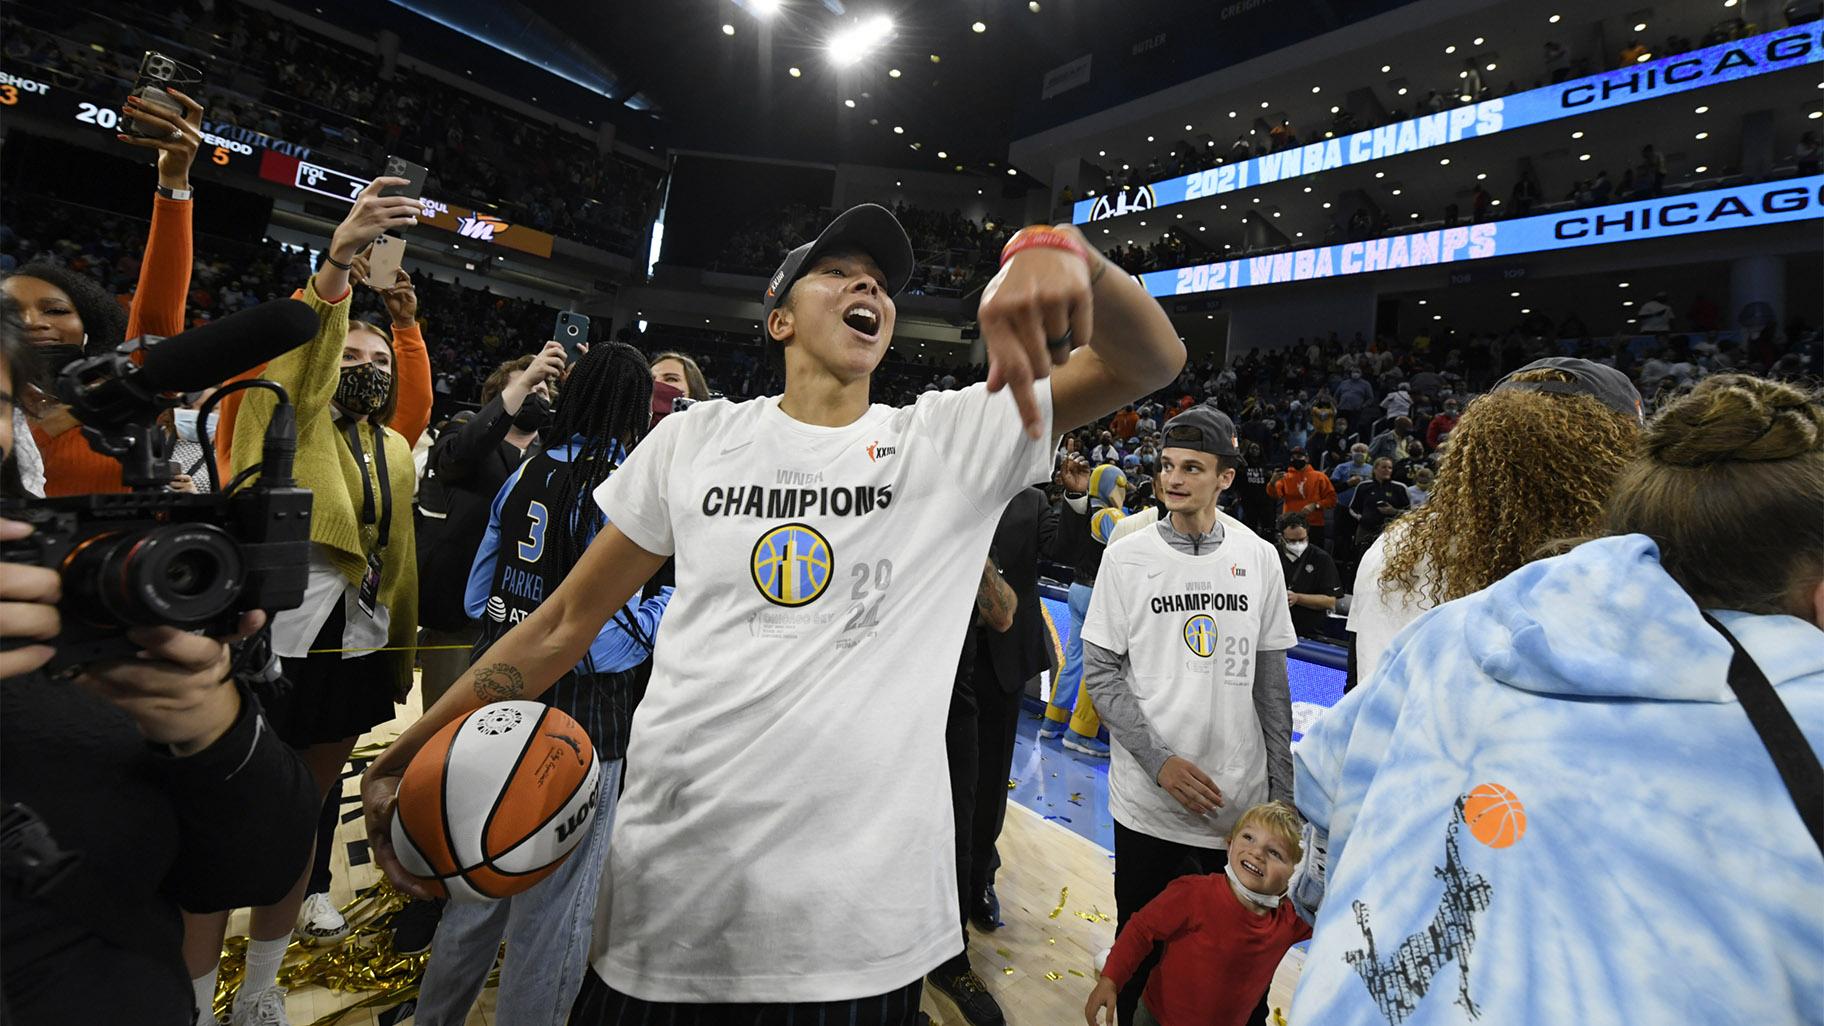 Chicago Sky's Candace Parker celebrates after her team defeated the Phoenix Mercury in Game 4 of the WNBA Finals to become champions Sunday, Oct. 17, 2021, in Chicago. (AP Photo / Paul Beaty, File)